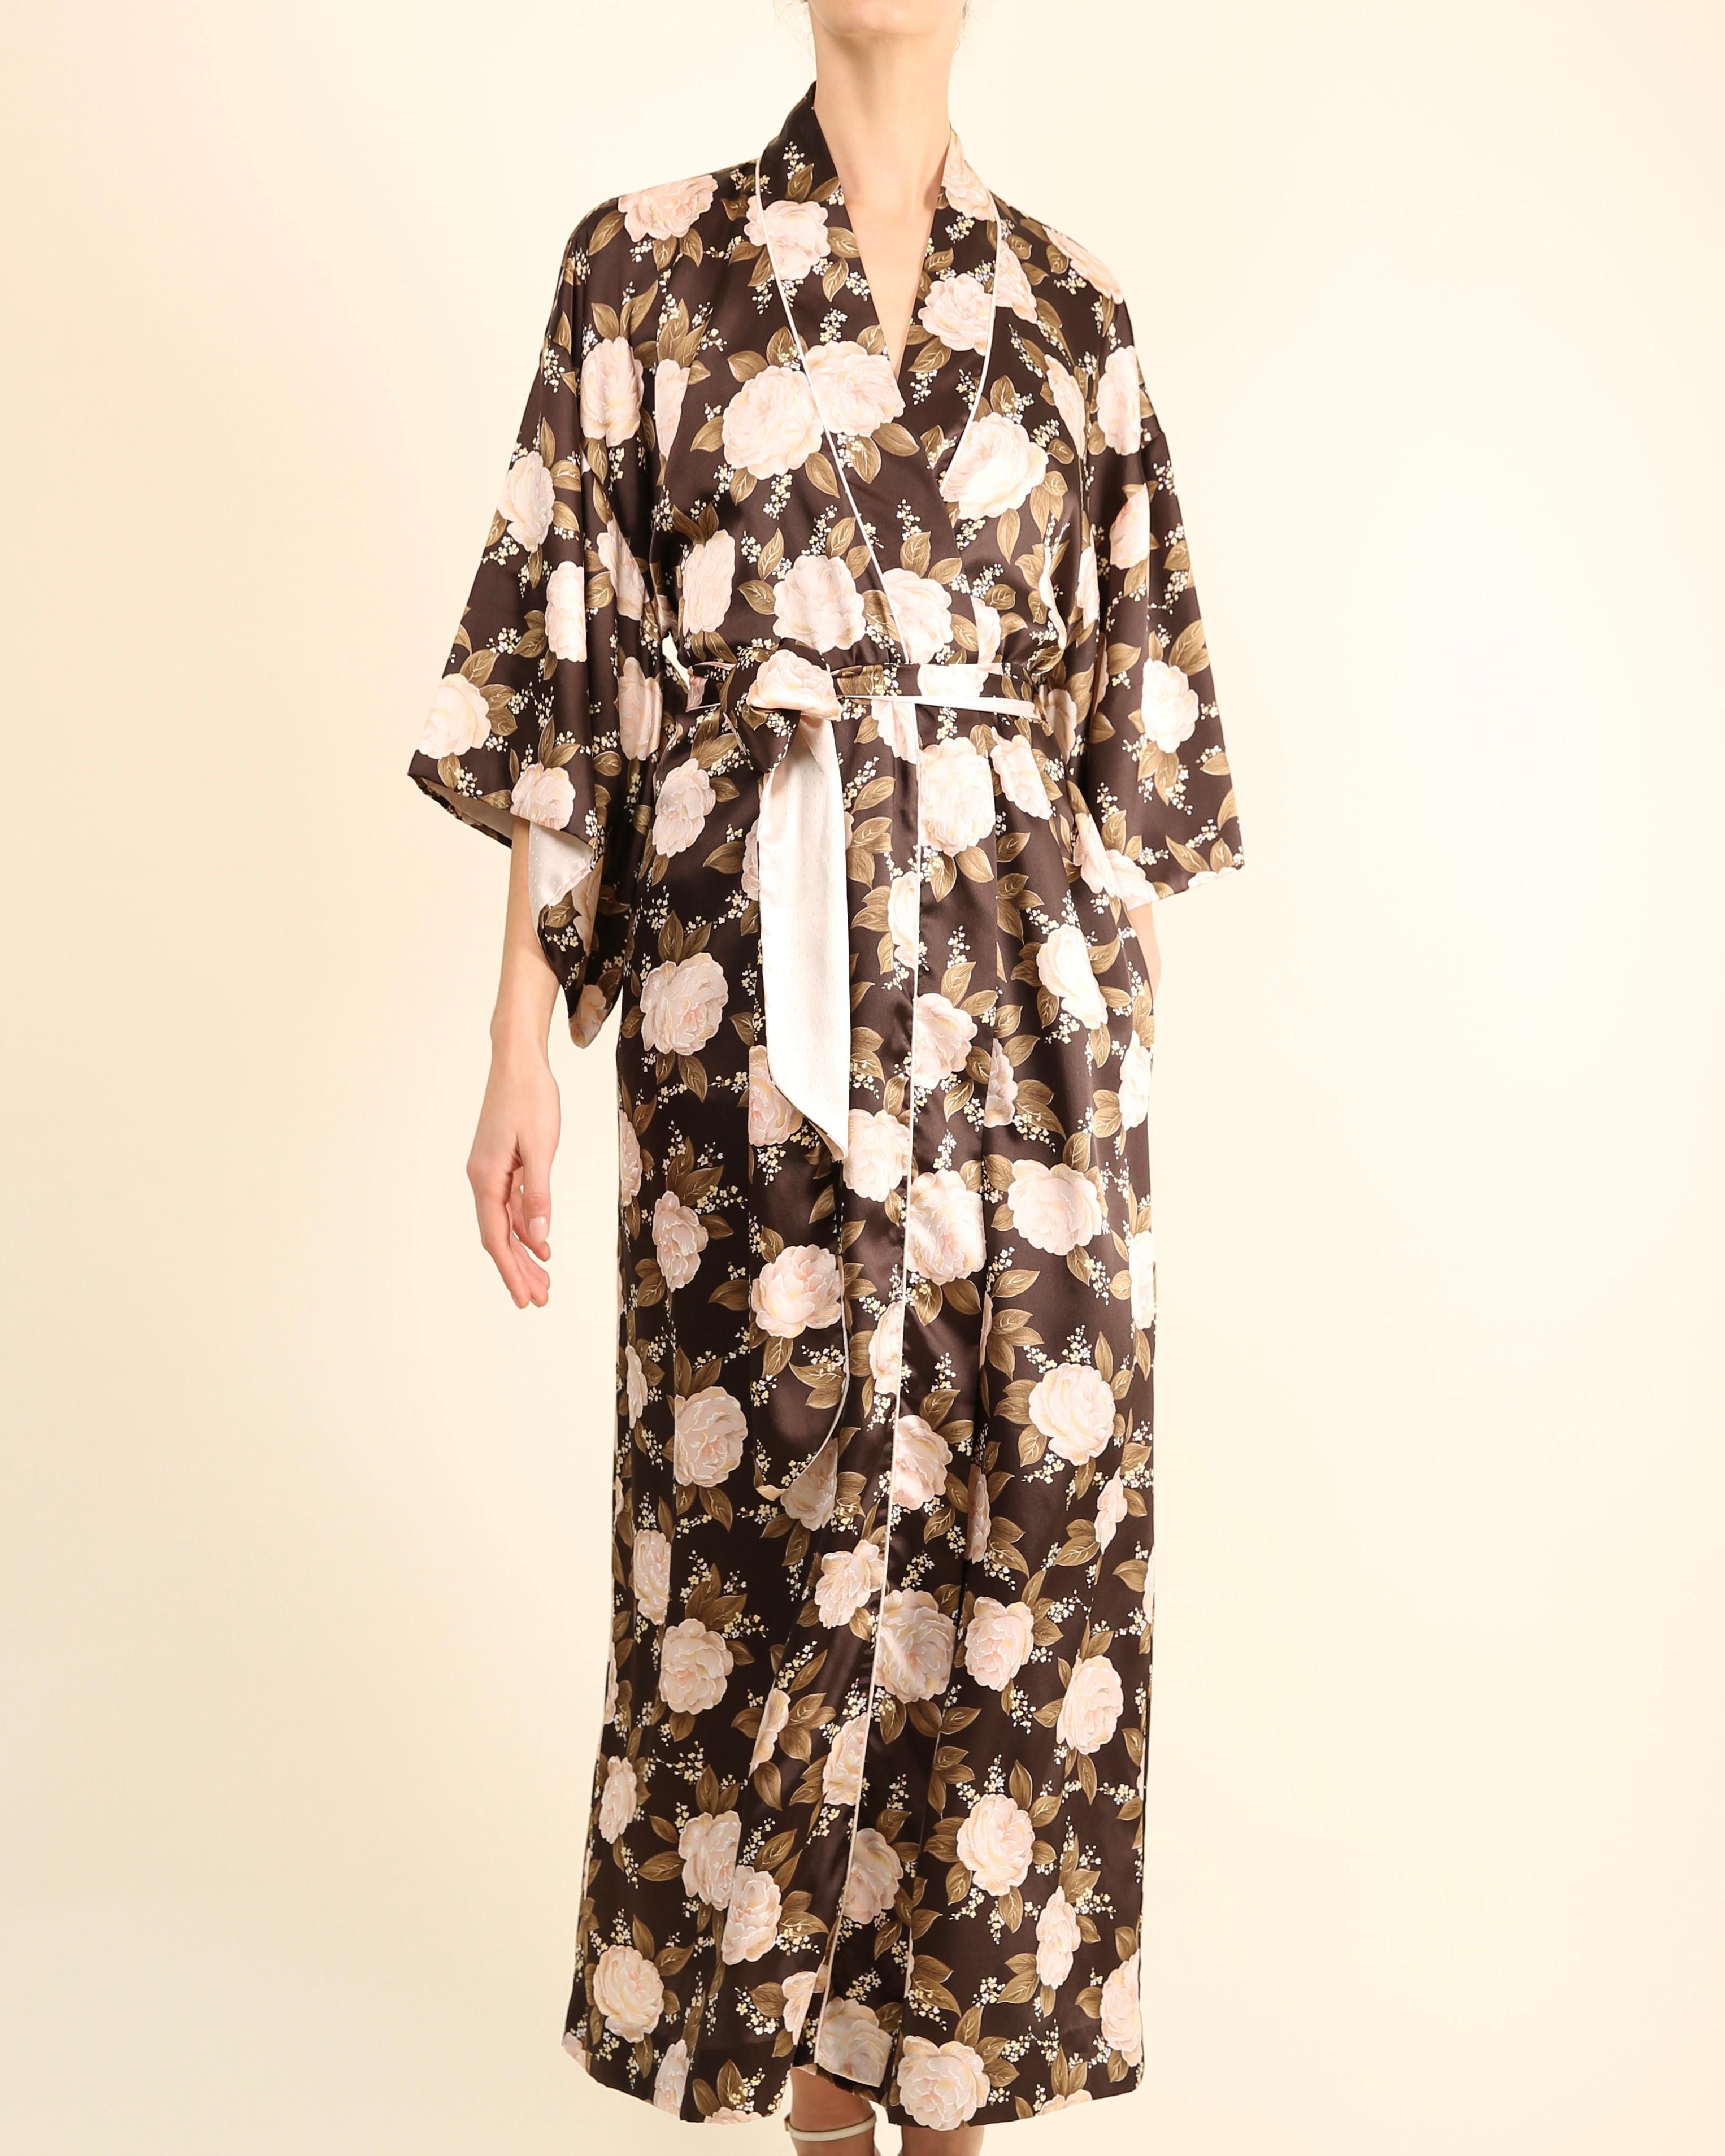 Christian Dior vintage brown pink floral kimono maxi coat dress robe night gown For Sale 11